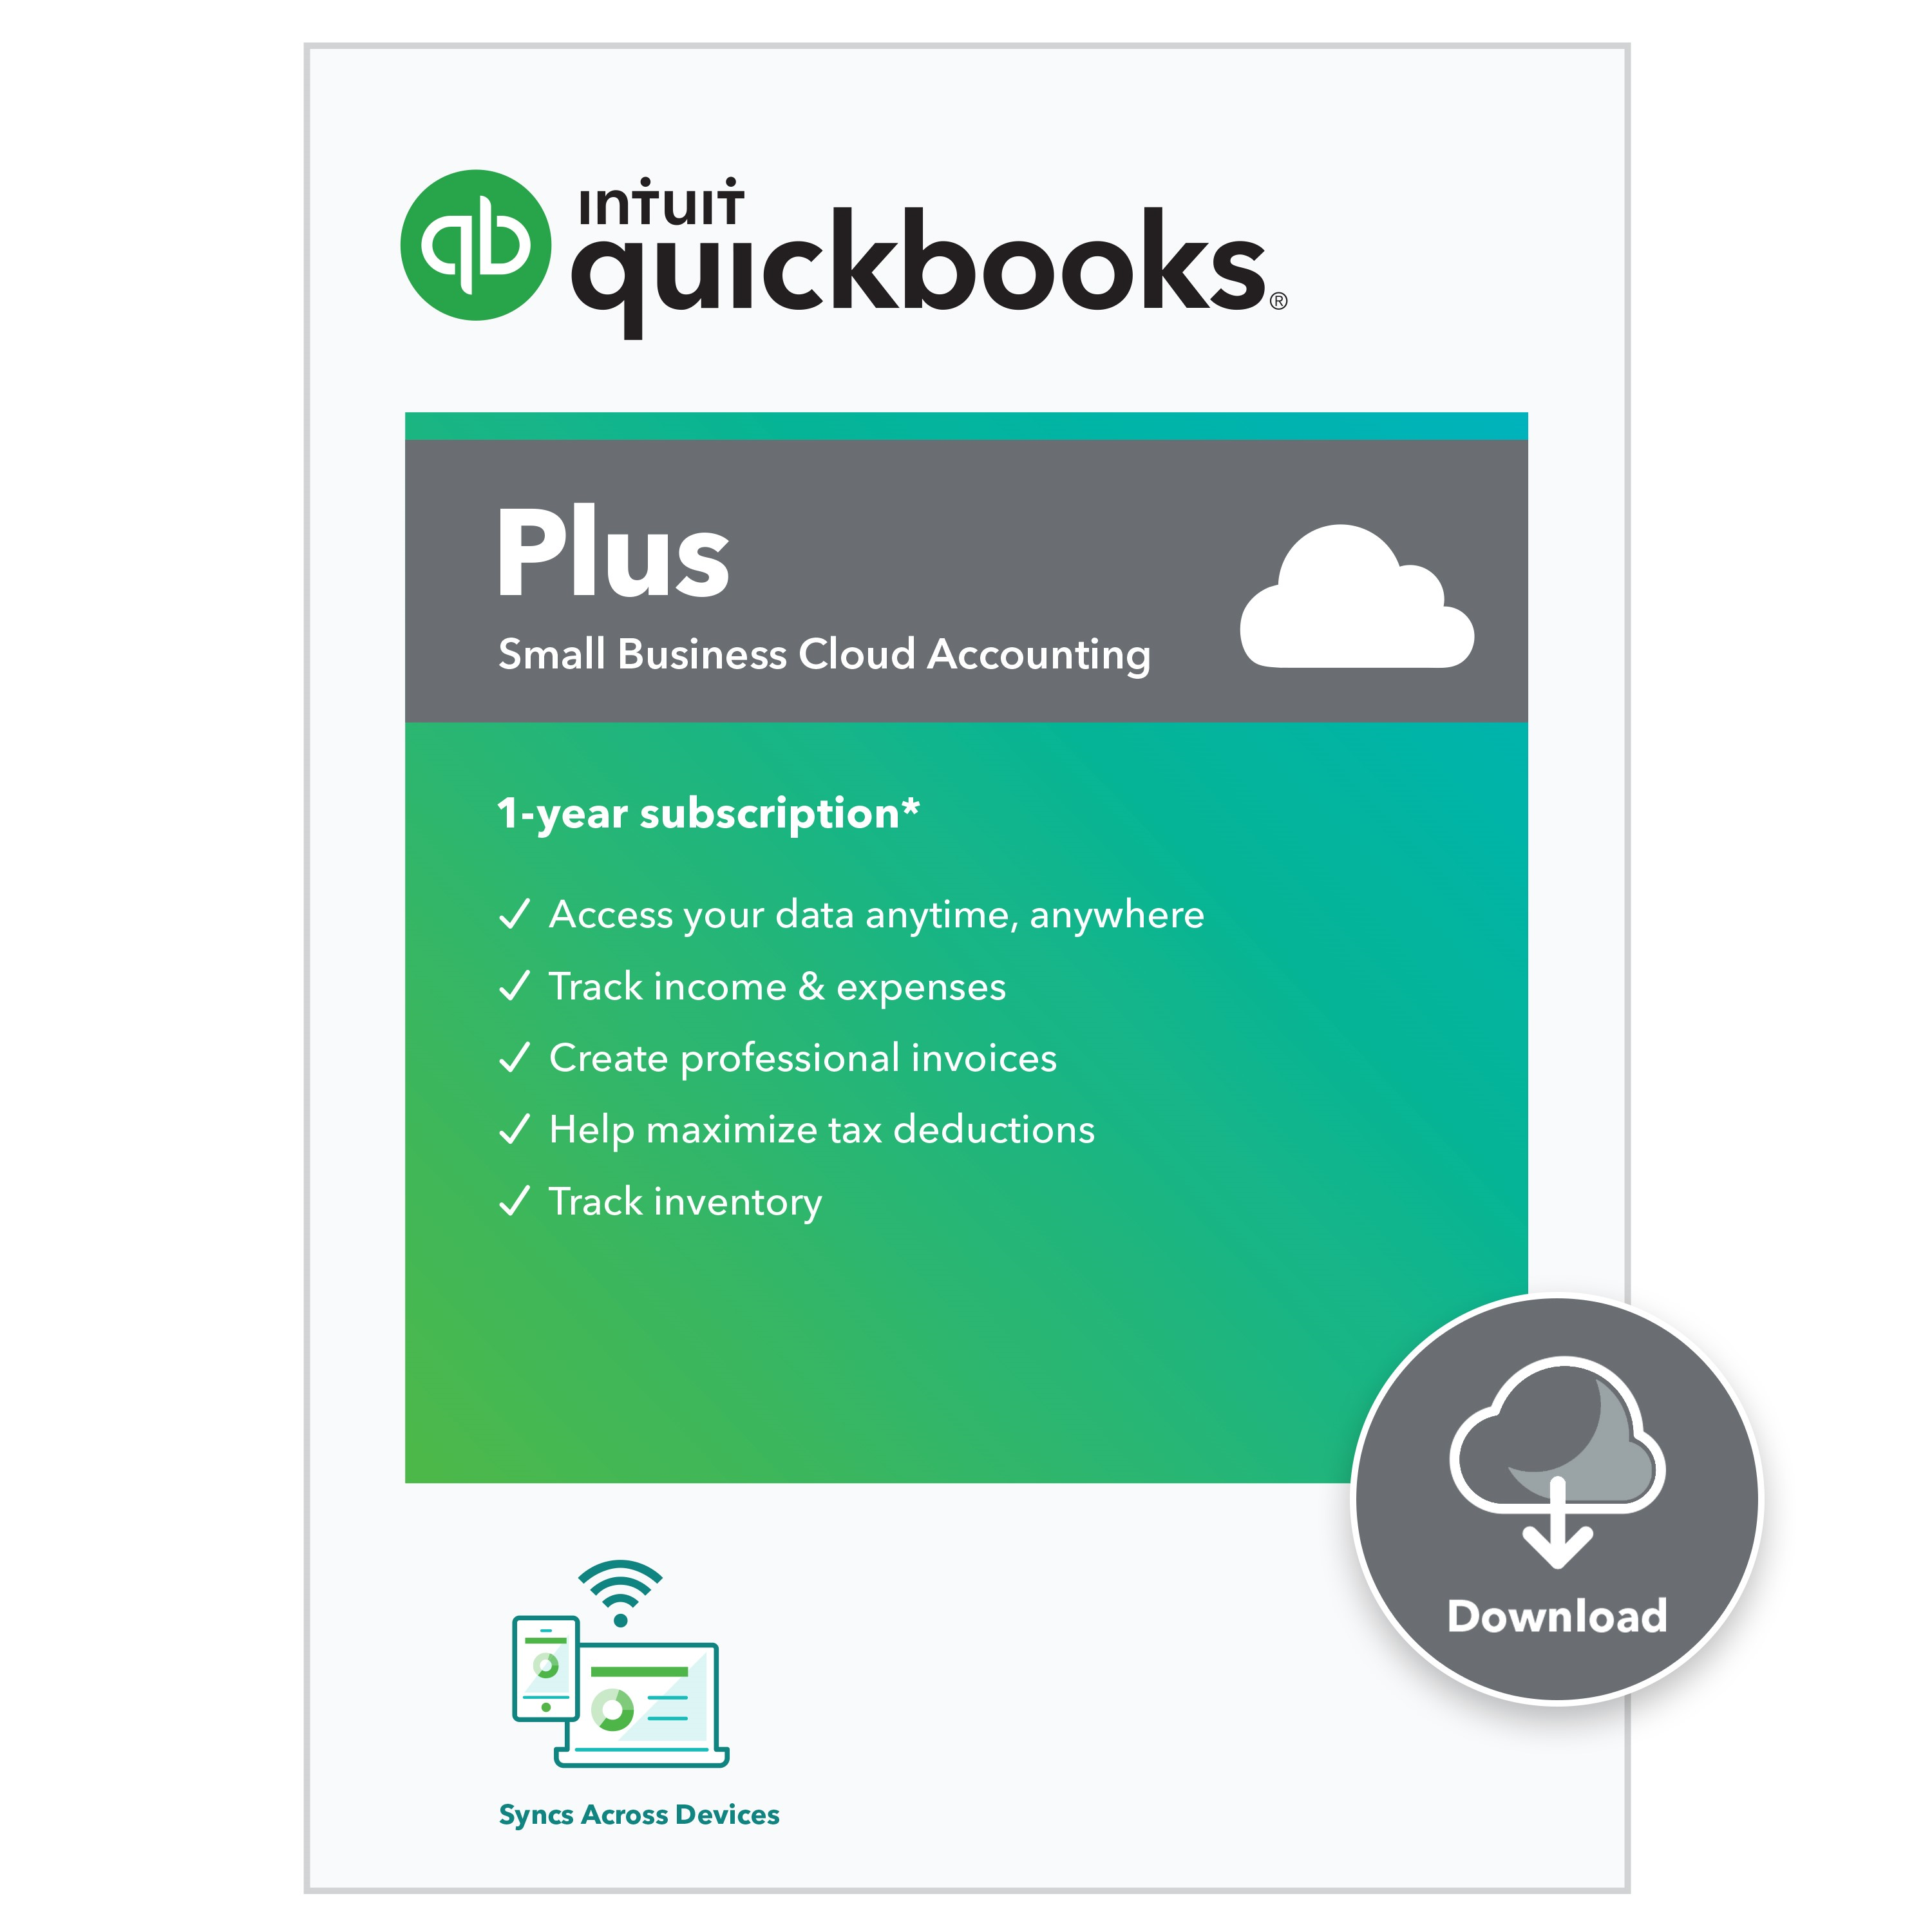 Learn QuickBooks Online Plus - Accounting Business Solutions by JCS offers QuickBooks Sales Data Migration Implementation And Training Classes. Call For QuickBooks Pricing and upgrade Cost, quickbooks online plus, quickbooks plus online, quickbooks data repair, quickbooks error messages, quickbooks online, QuickBooks online training, quickbooks online training classes, quickbooks online training class, quickbooks online class, quickbooks online consultant, quickbooks independent training, quickbooks near me, hands on quickbooks training, advanced quickbooks training, quickbooks Proadvisor support, quickbooks support, quickbooks cost, quickbooks cost quickbooks online simple start, quickbooks online, quickbooks online login, quickbooks online features, quickbooks online price, quickbooks online cost, quickbooks online help, quickbooks online support, quickbooks online training, quickbooks online classes, quickbooks online business intelligence, quickbooks online edi integration, quickbooks online essentials, quickbooks online manufacturing, quickbooks online or desktop, quickbooks online payroll cost, quickbooks online power bi, quickbooks online receipt capture, quickbooks online reseller, quickbooks, online training, quickbooks online training class, quickbooks online training classes, quickbooks cost, quickbooks price